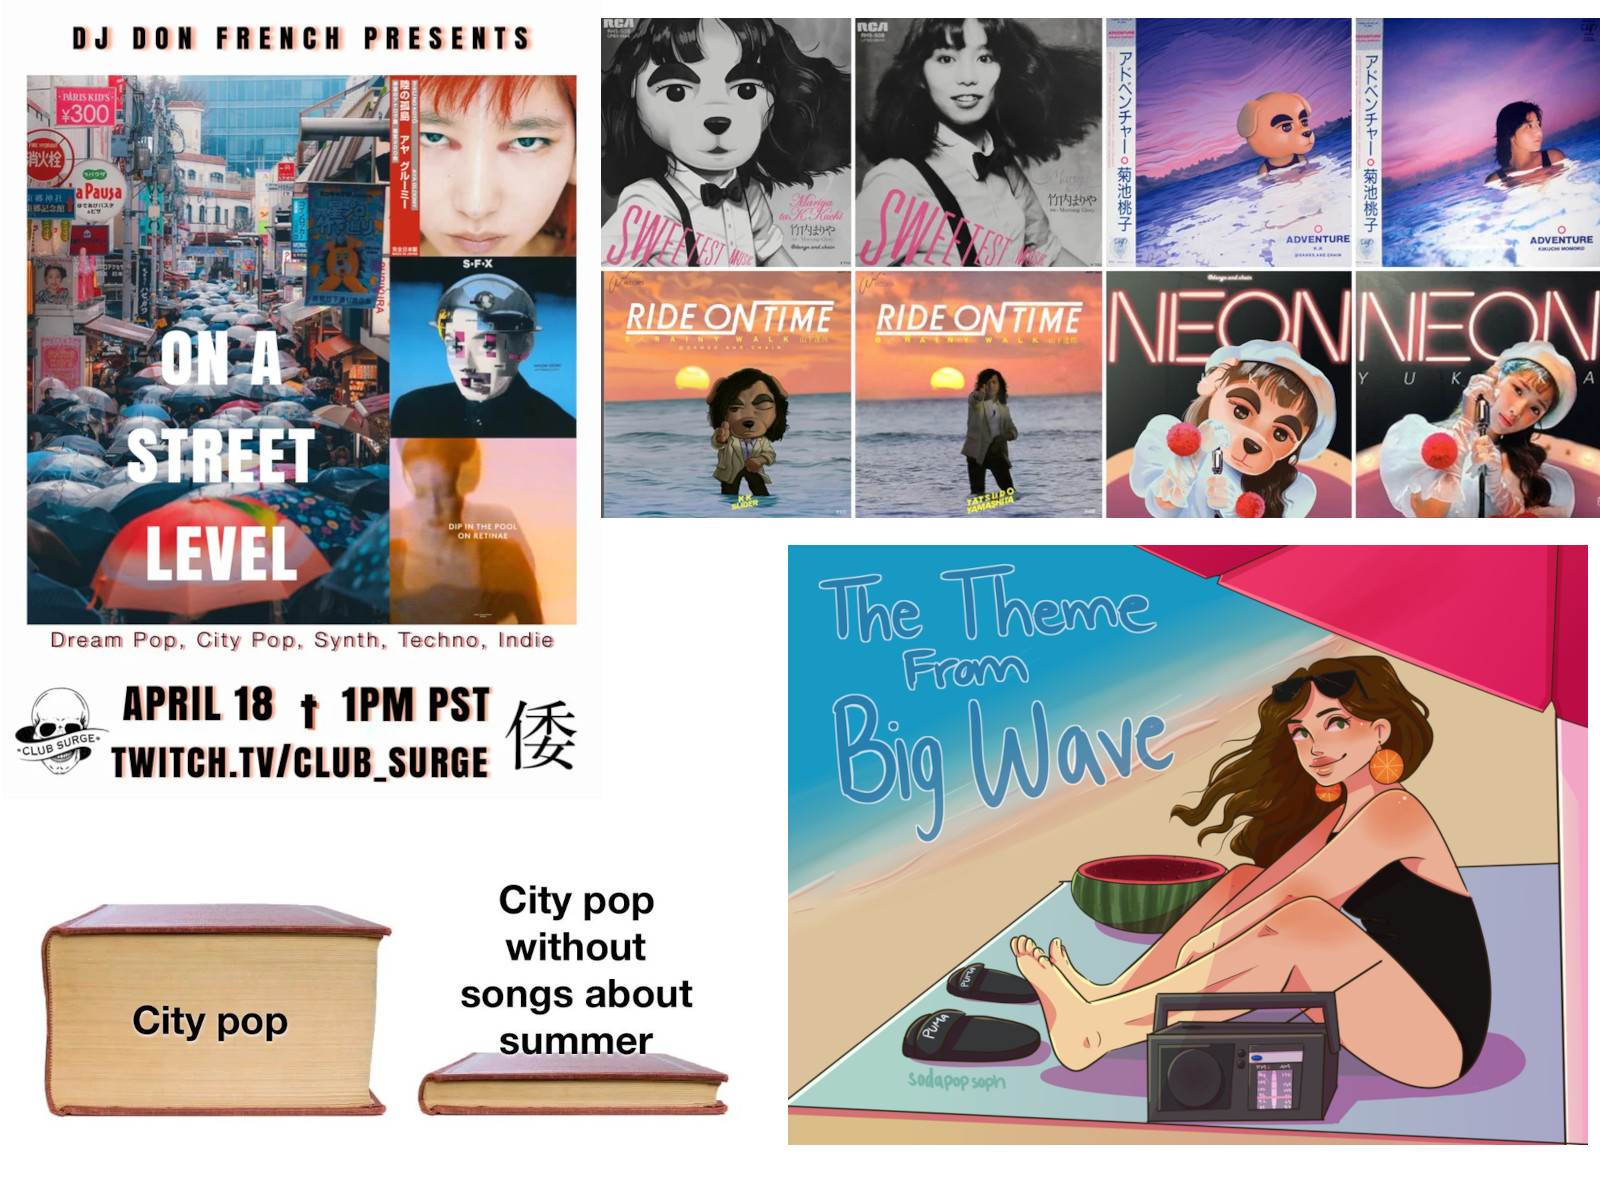 A poster for a recent show, Animal Crossing-style albums, art of a woman at the beach, and a city pop image meme